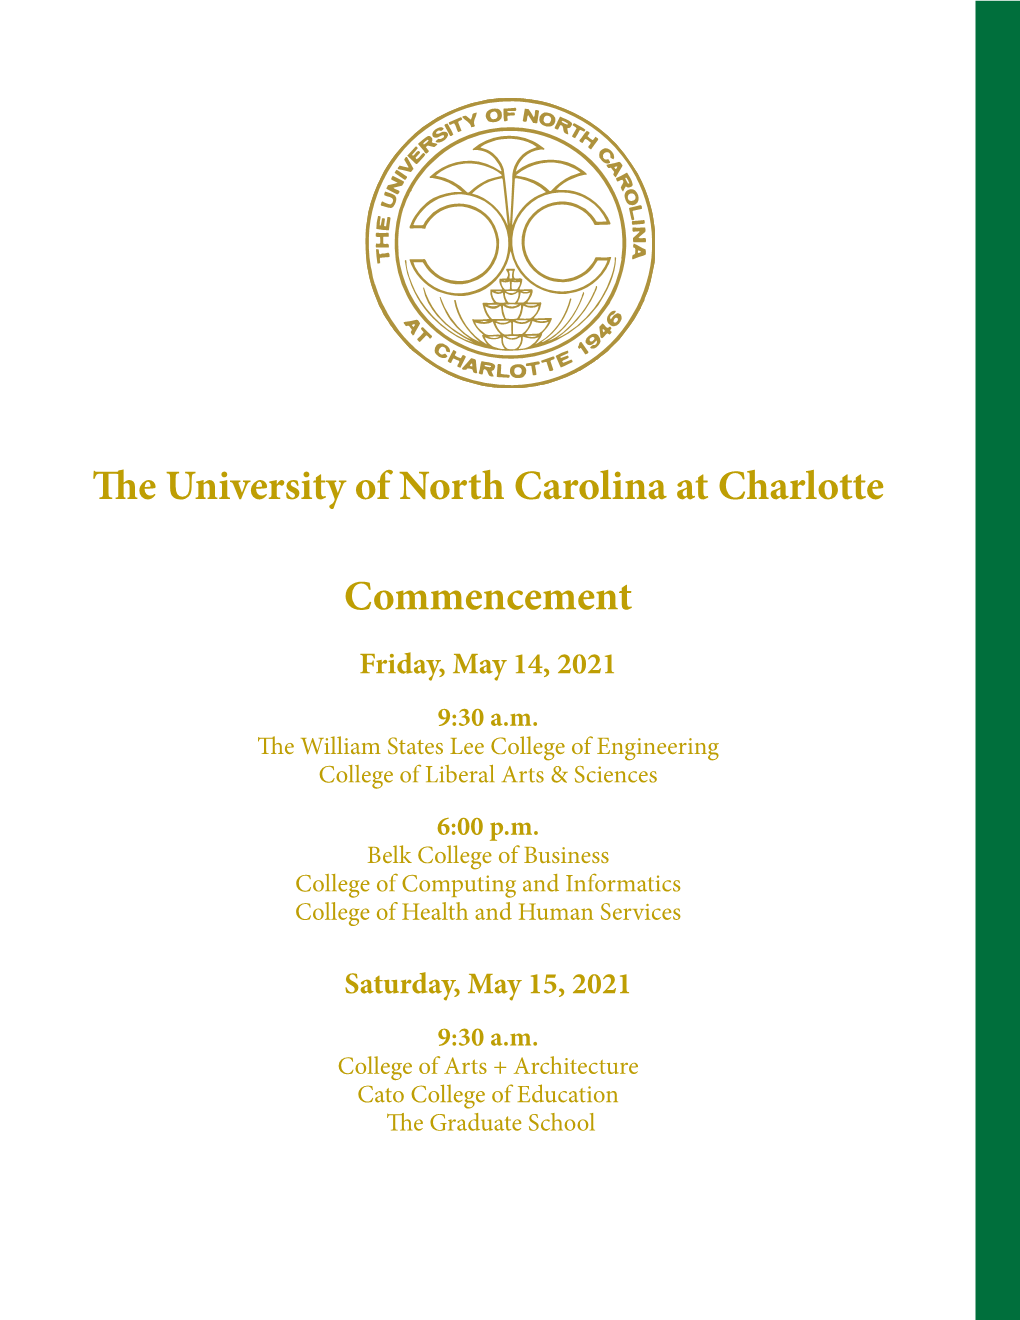 The University of North Carolina at Charlotte Commencement